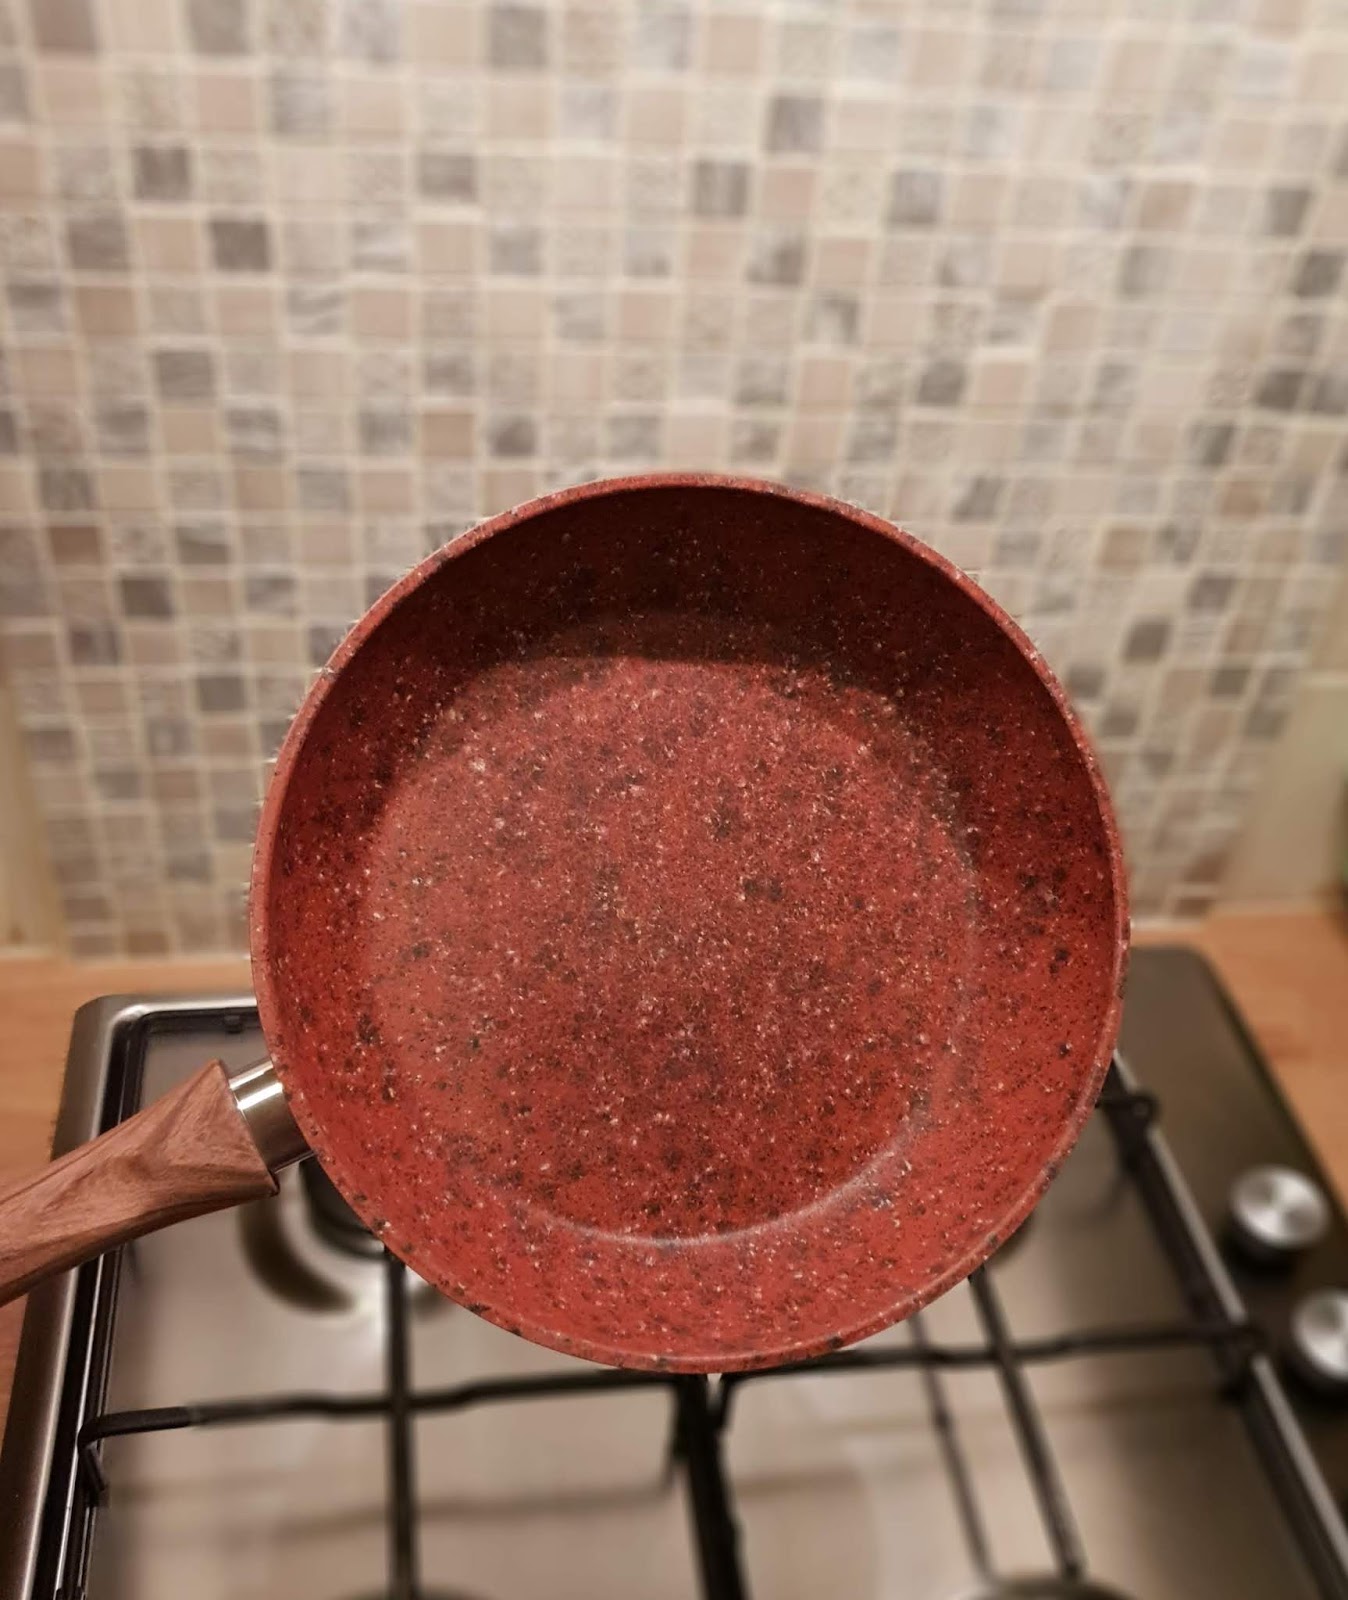 A review of JML copper stone pans, good for daily use?